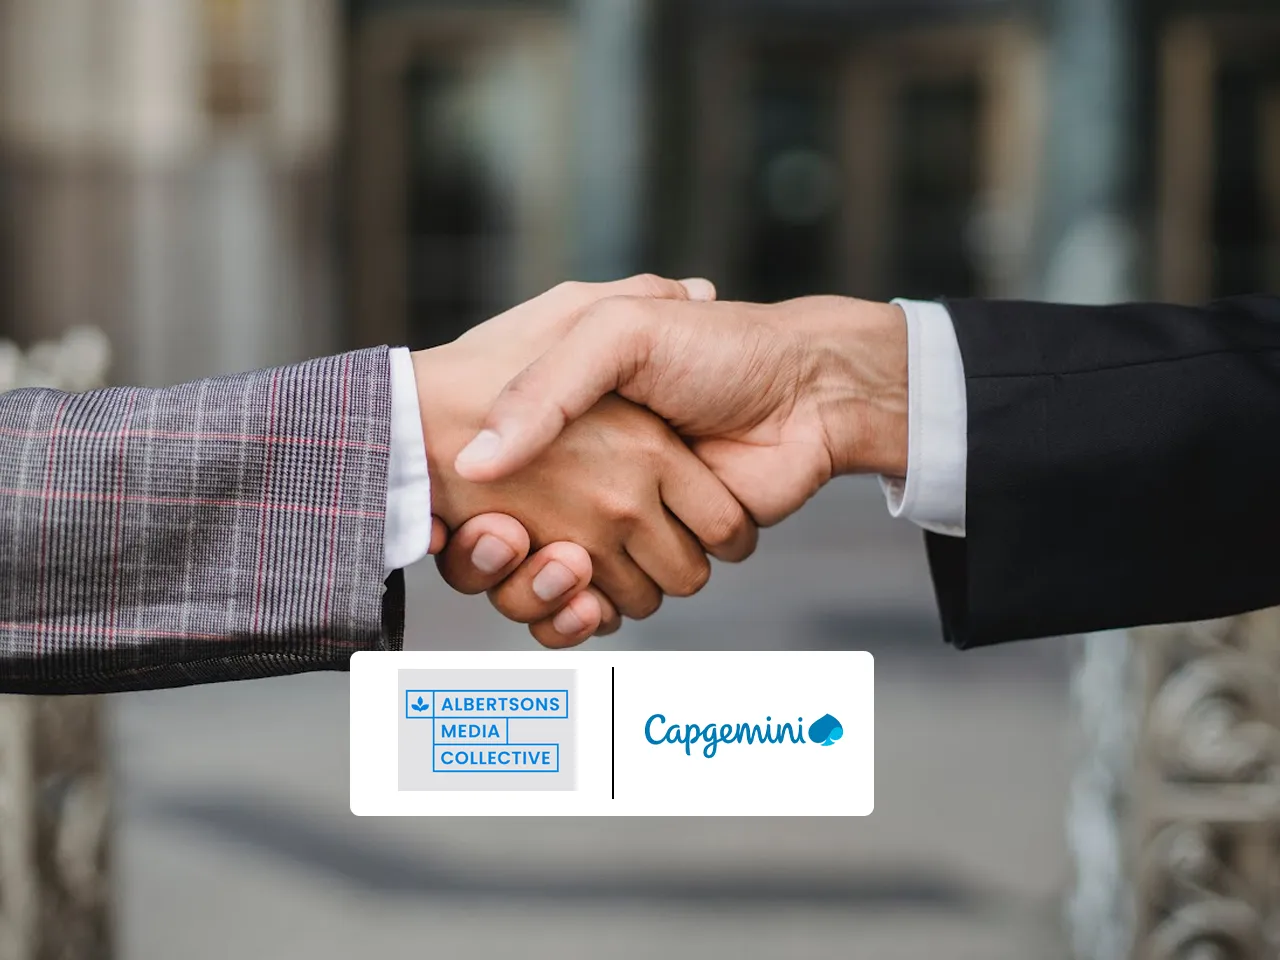 Albertsons Media Collective appoints Capgemini as global agency partner